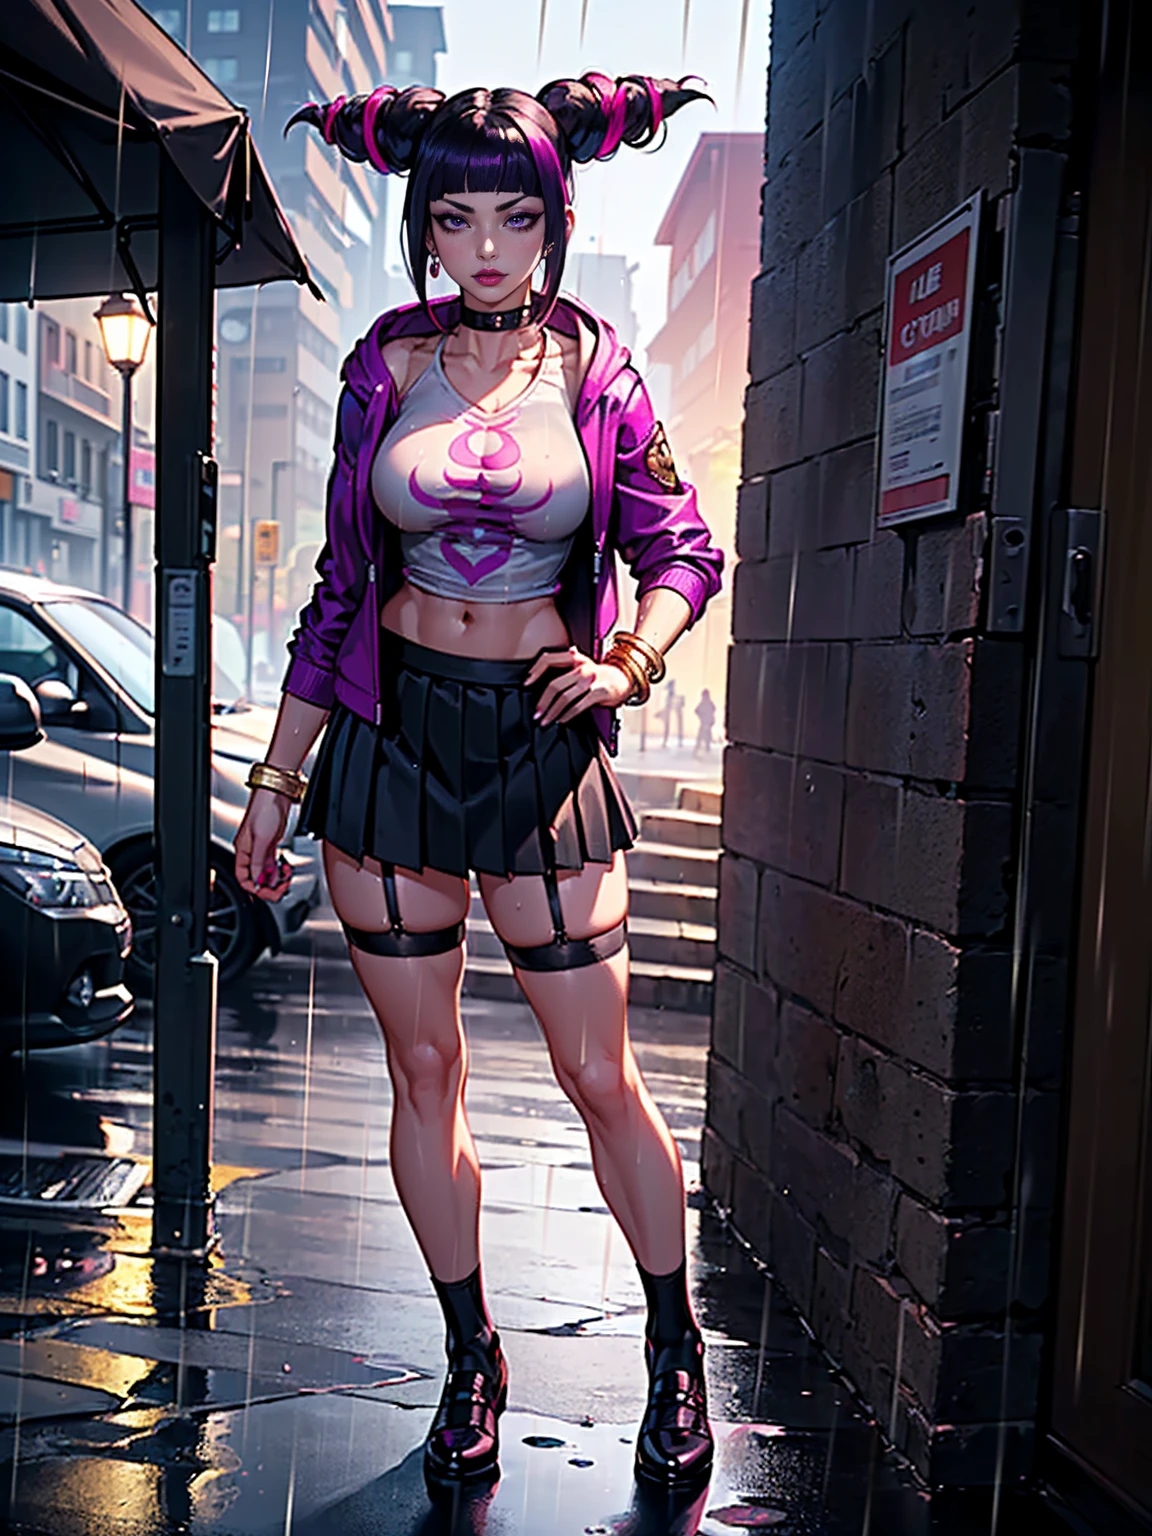 ((1girl, solo ,alone, Juri Han, pretty Juri Han from Street Fighter, big ass, purple eyes, purple eyes, thrjuri, multicolored hair, purple eyes, twojuri, foujuri, muscular female, gold bracelets, ruby earrings)), athletic body, toned body, fitness, ((solo, (1woman, pink lipstick), Extremely detailed, ambient soft lighting, 4k, perfect eyes, a perfect face, perfect lighting, a 1girl)), ((fitness,, shapely body, athletic body, toned body)), ((on a cloudy street，bright street，Corner store，stair station，Torrential rain and rain，She is wearing a red hooded jacket，Put on a hoodie，White color blouse, white printed blouse，Short black skirt, full skirt, black pleated skirt, black garter belt，Martin shoes，Rain-soaked clothes，Black Exposure，outdoor deep tent)), draped collar